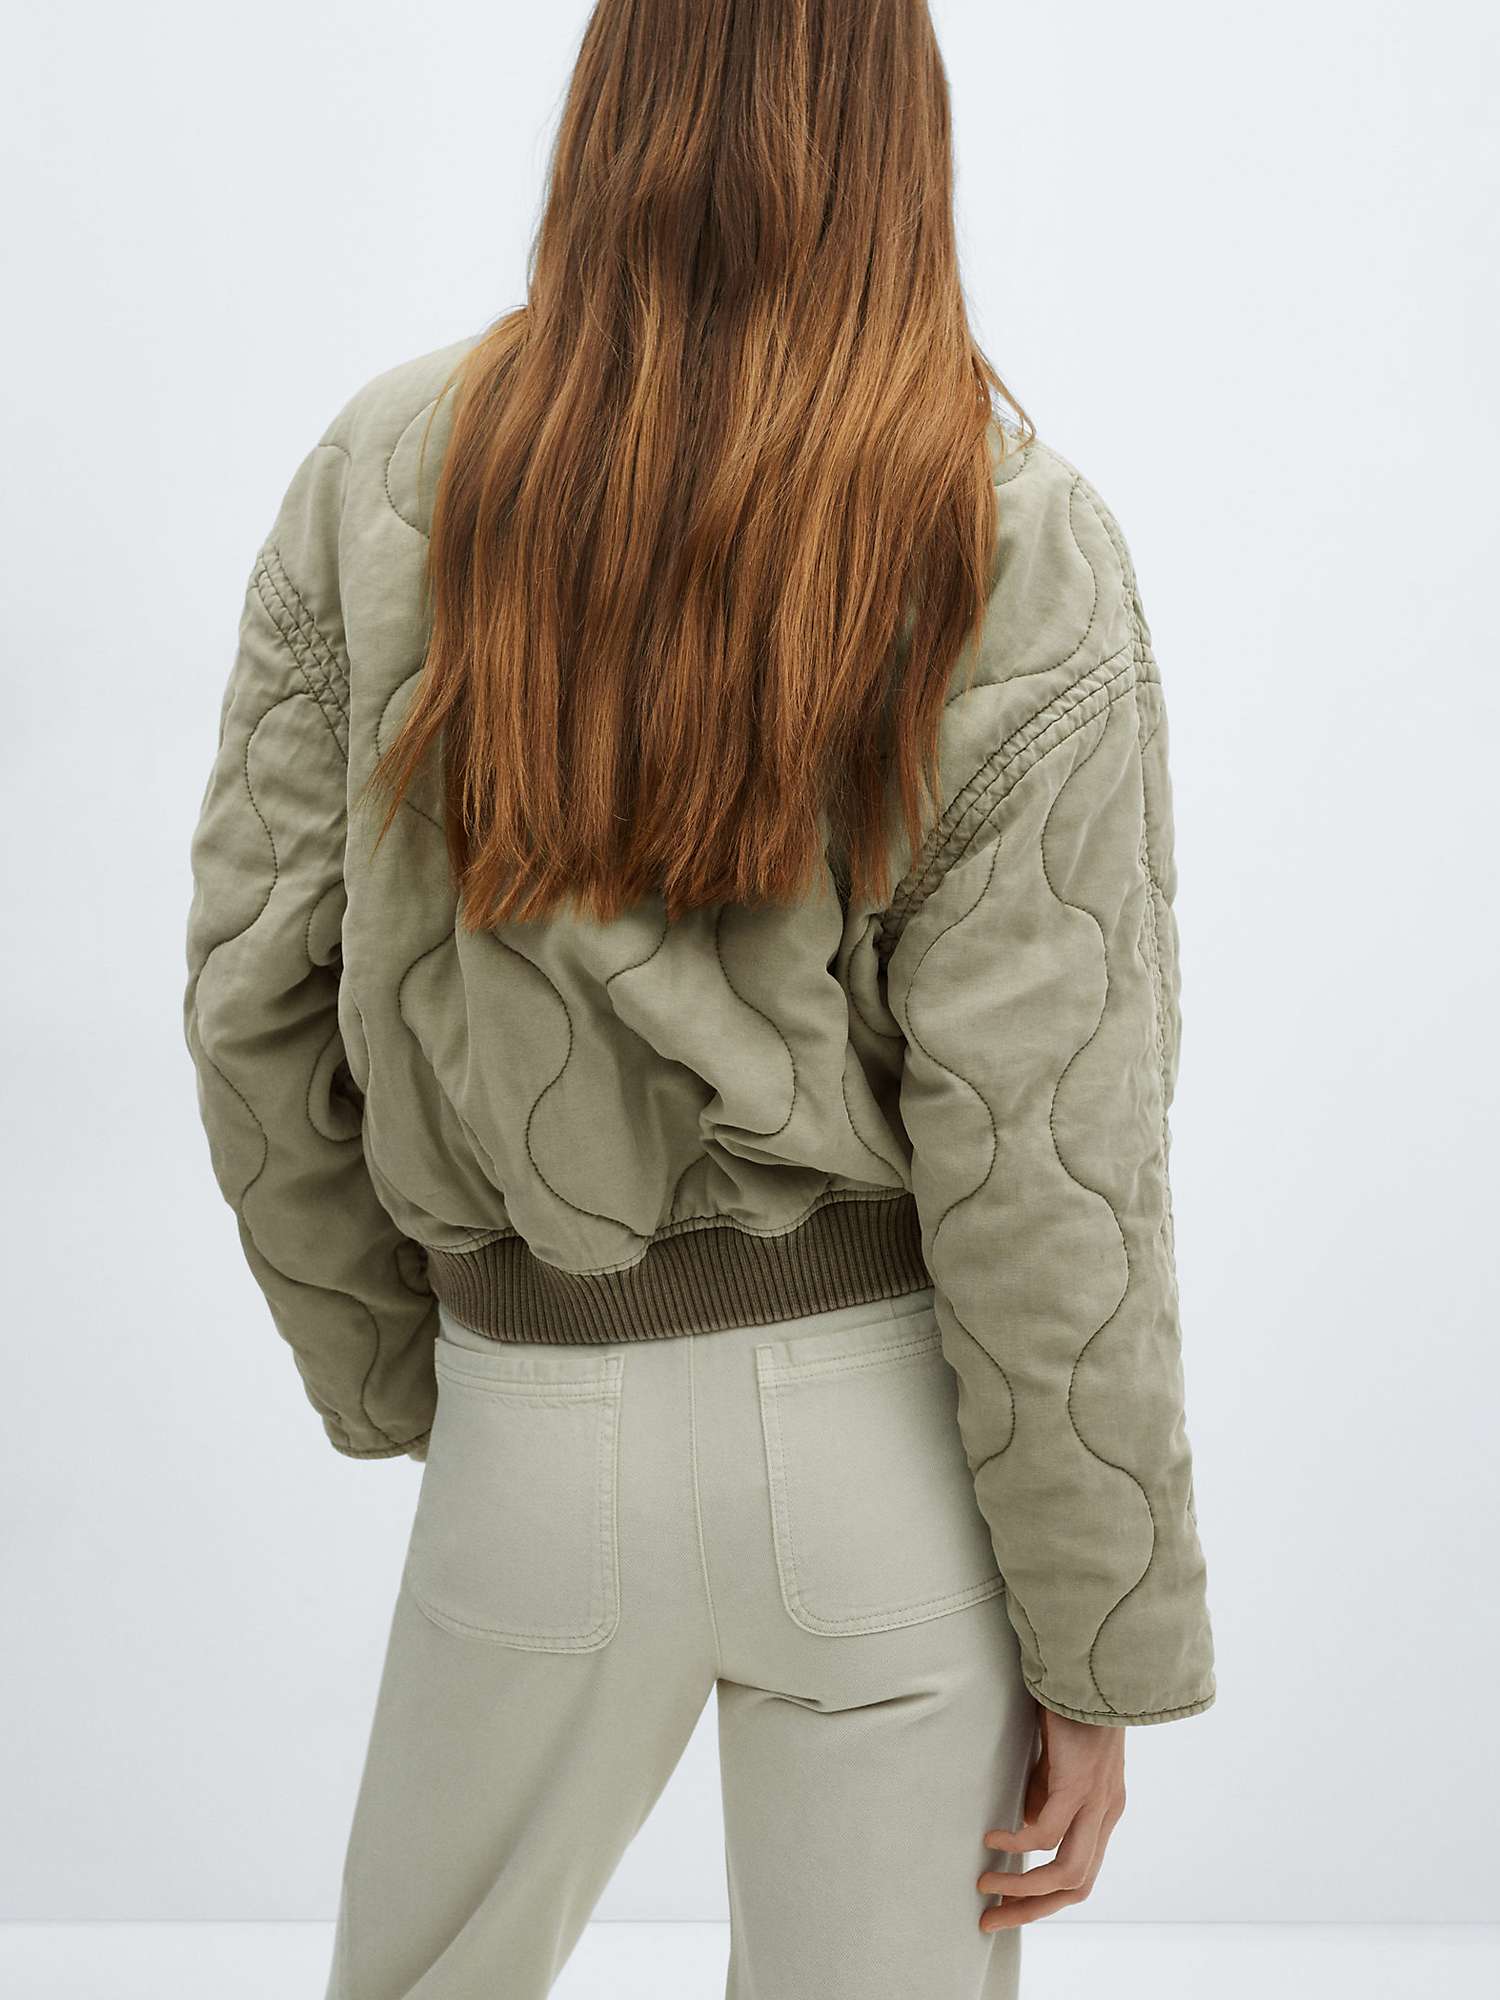 Buy Mango Hawai Quilted Bomber Jacket Online at johnlewis.com